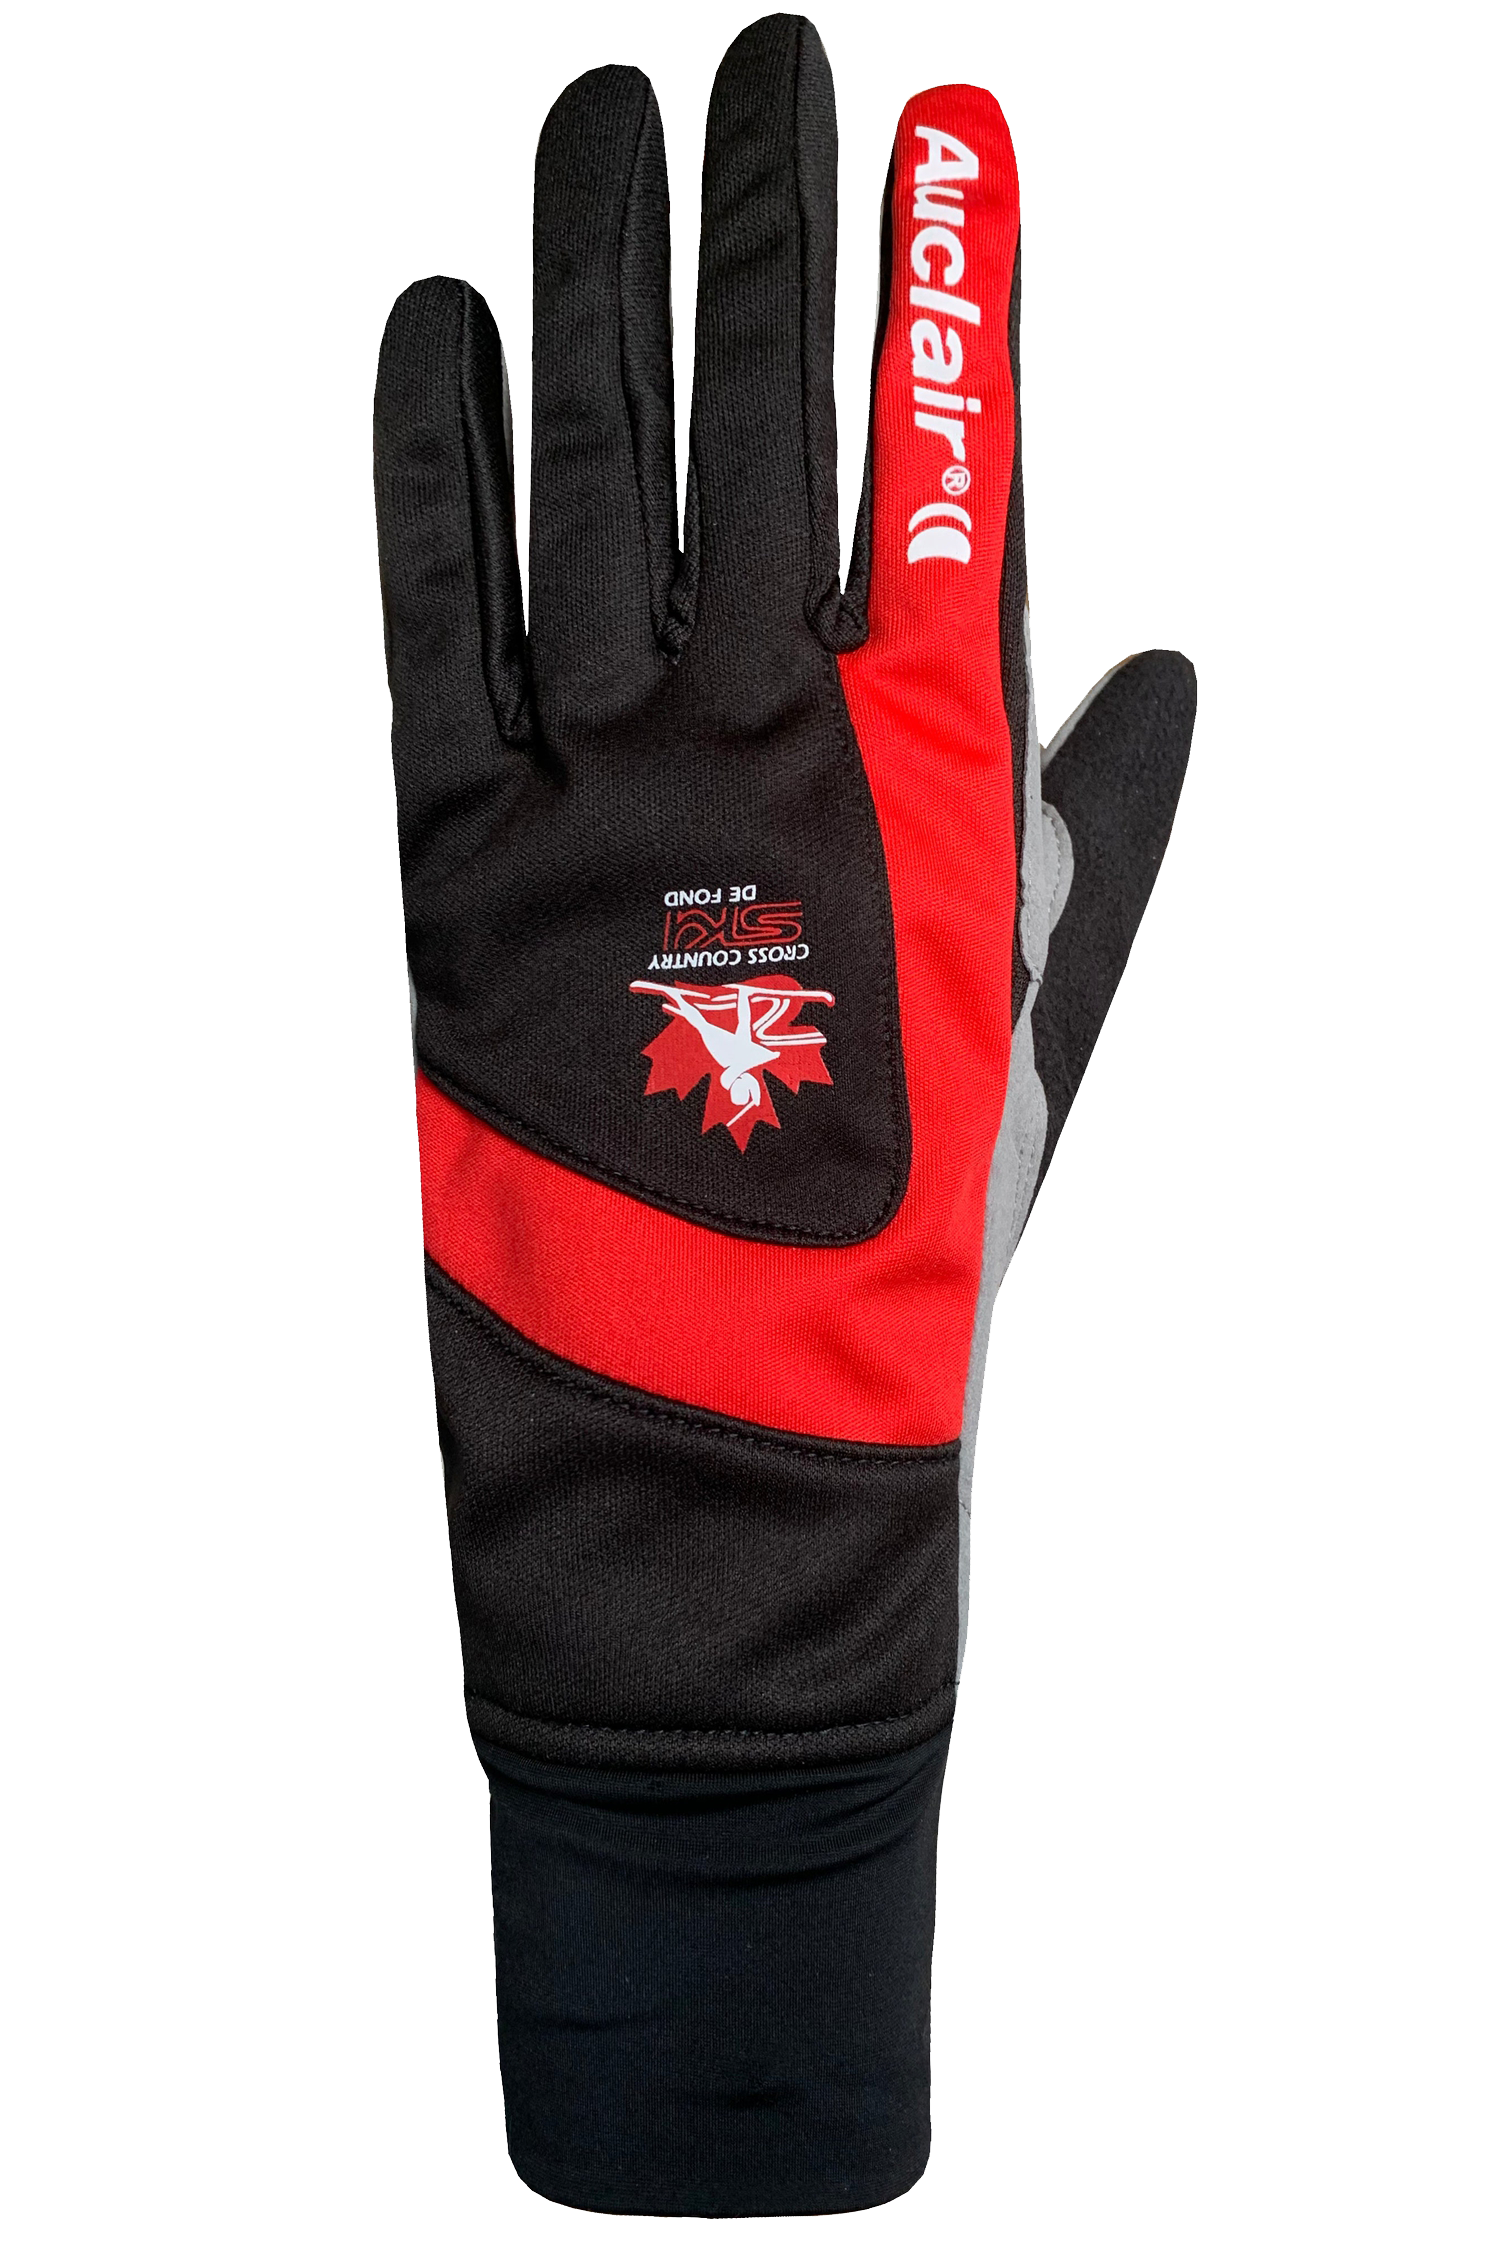 Cross Country Training Gloves - Men-Glove-Auclair-S-BLACK/WHITE/RED-Auclair Sports